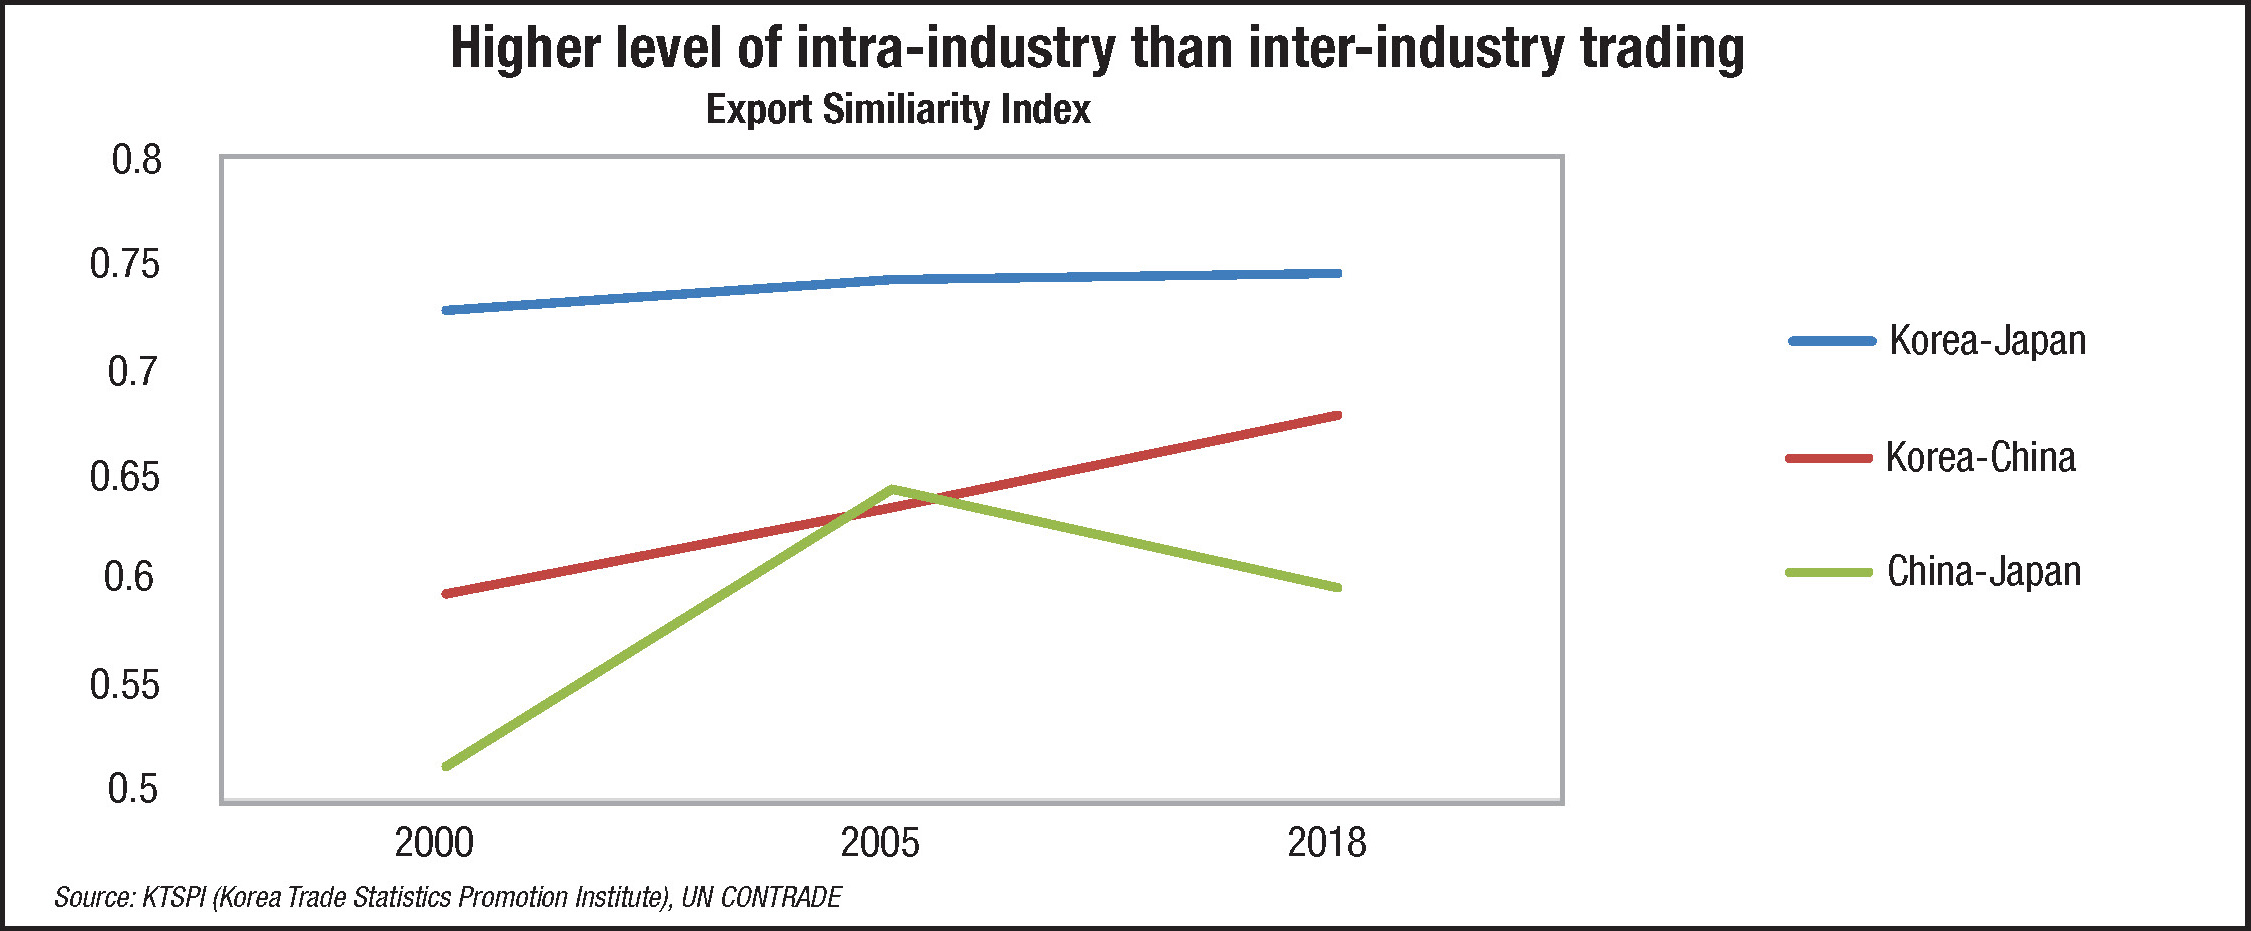 Higher level of intra-industry that inter-industry trading